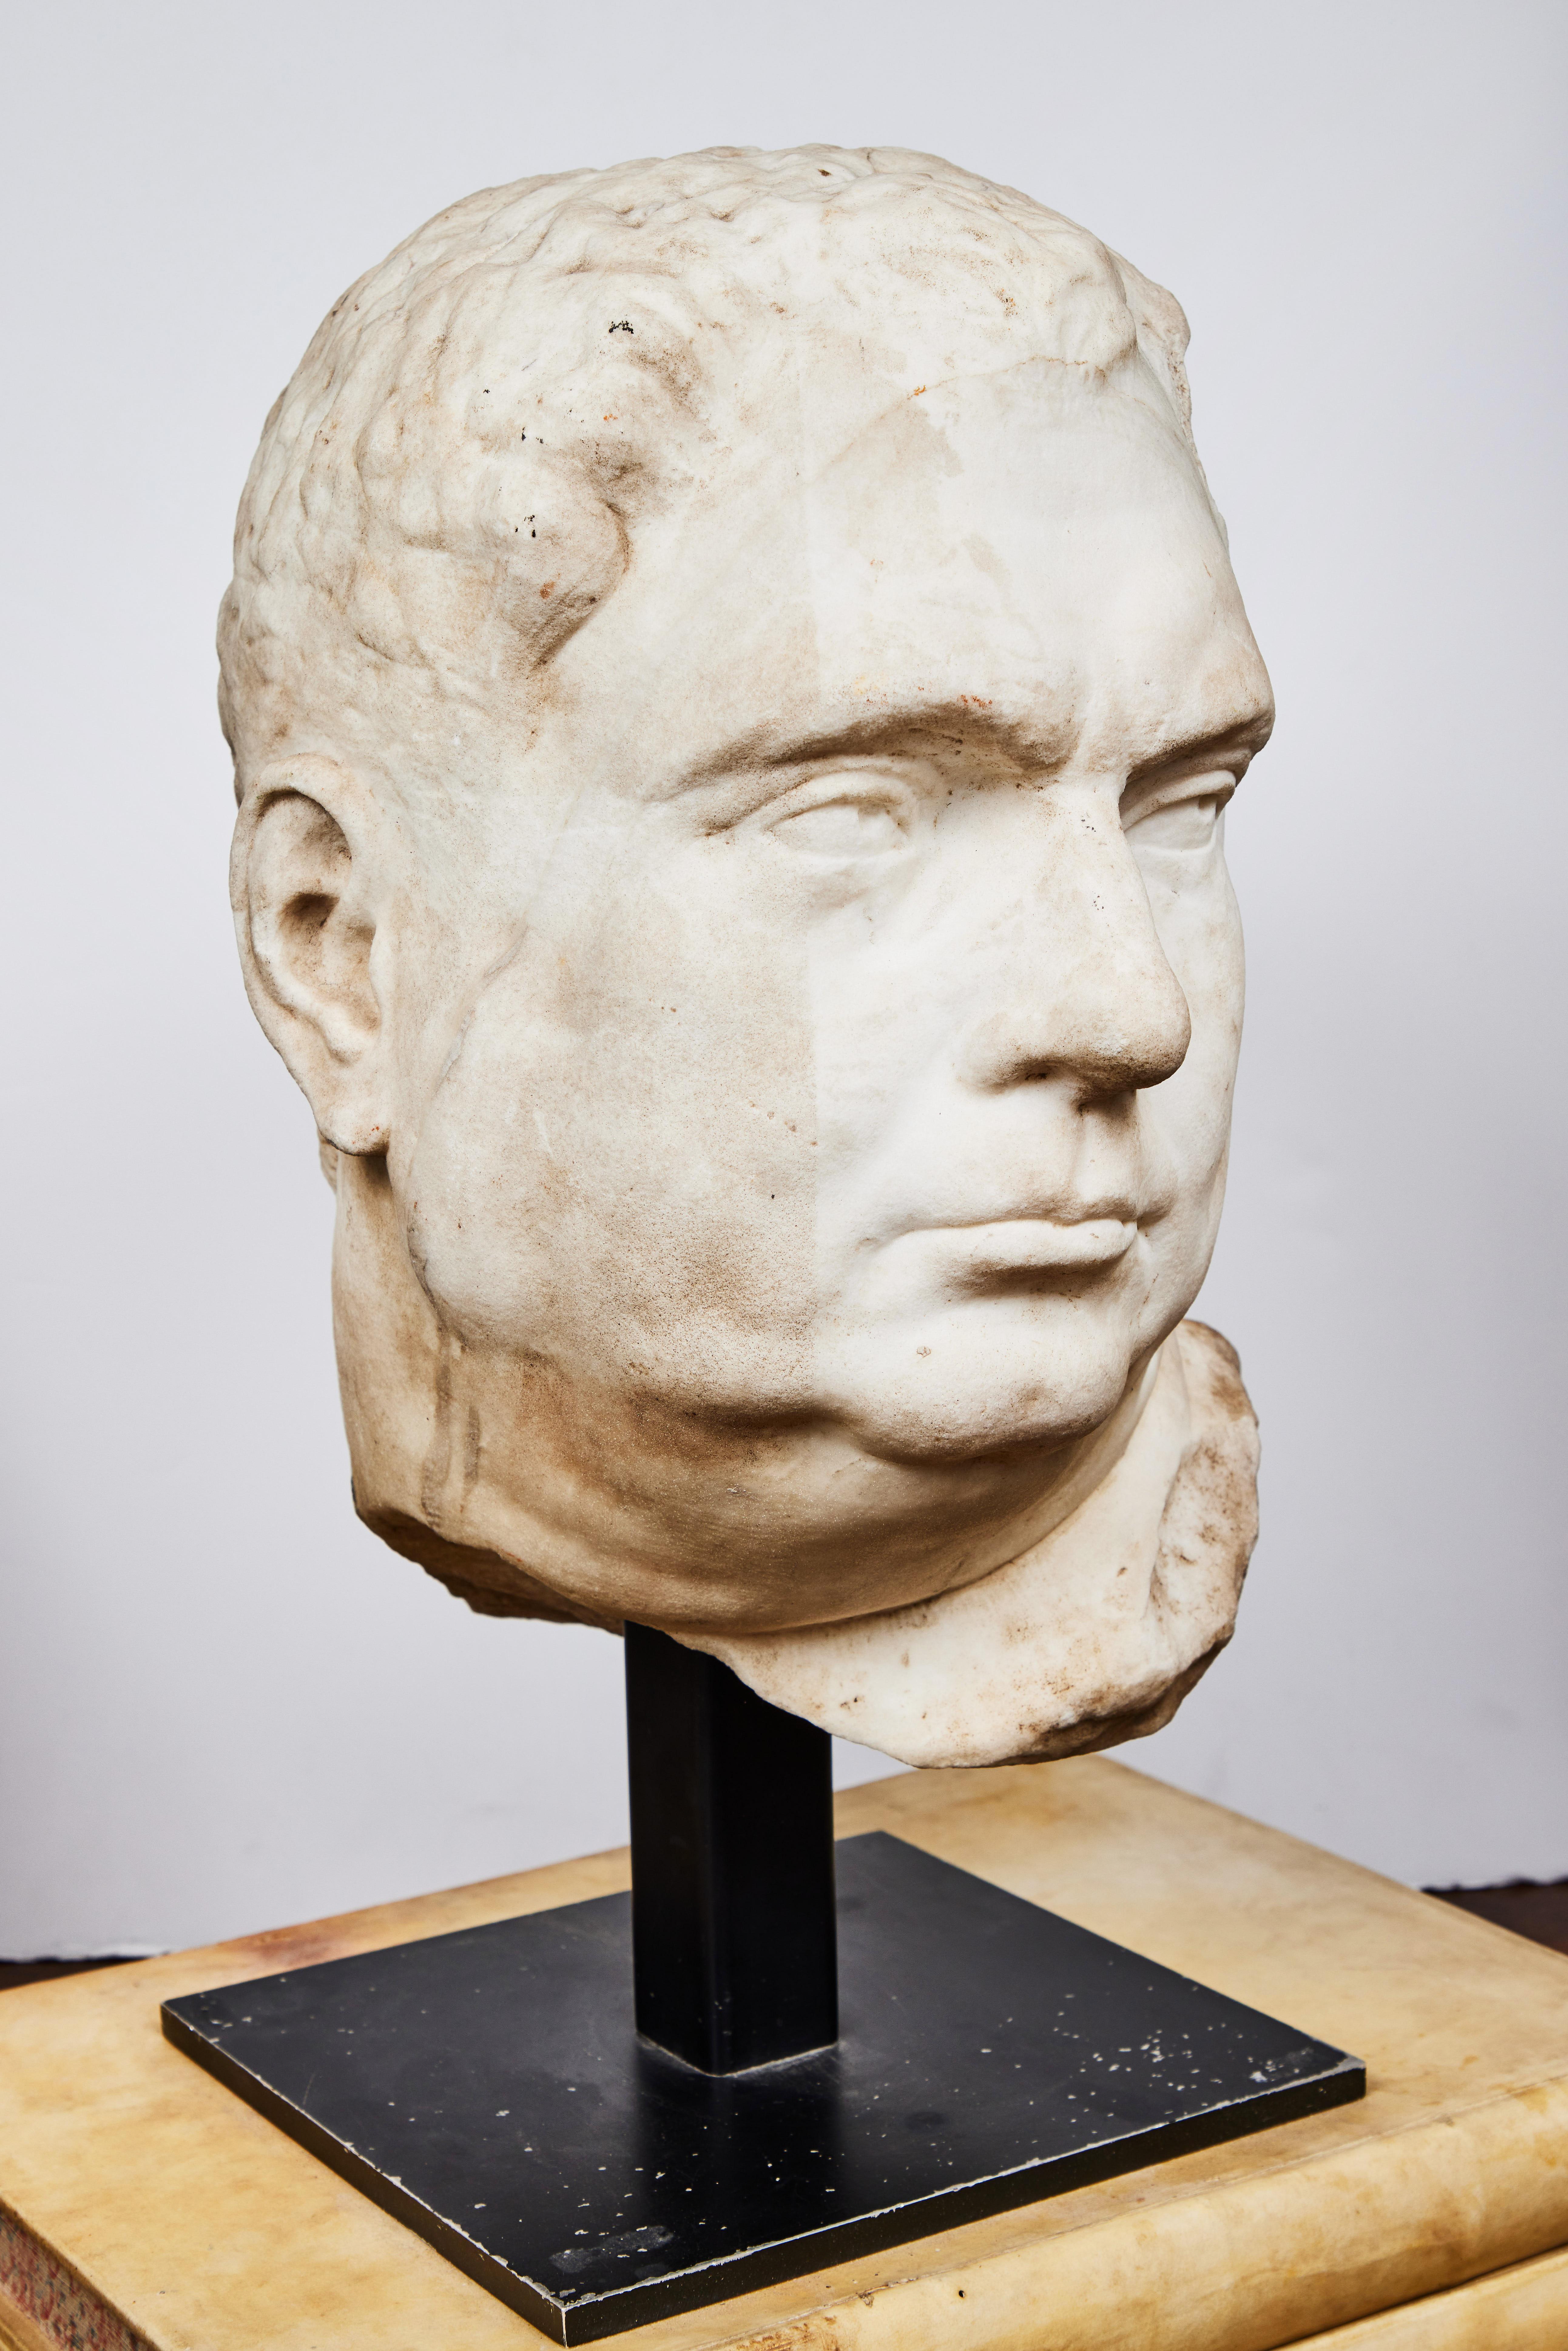 Substantial, hand carved, solid marble bust of Roman Emperor Vitellius (24-69 C.E.) on a custom, iron base. Likely a 16th century copy of a 2nd century original known as the “Grimani Vitellius”, which was gifted to Cardinal Domenico Grimani for his